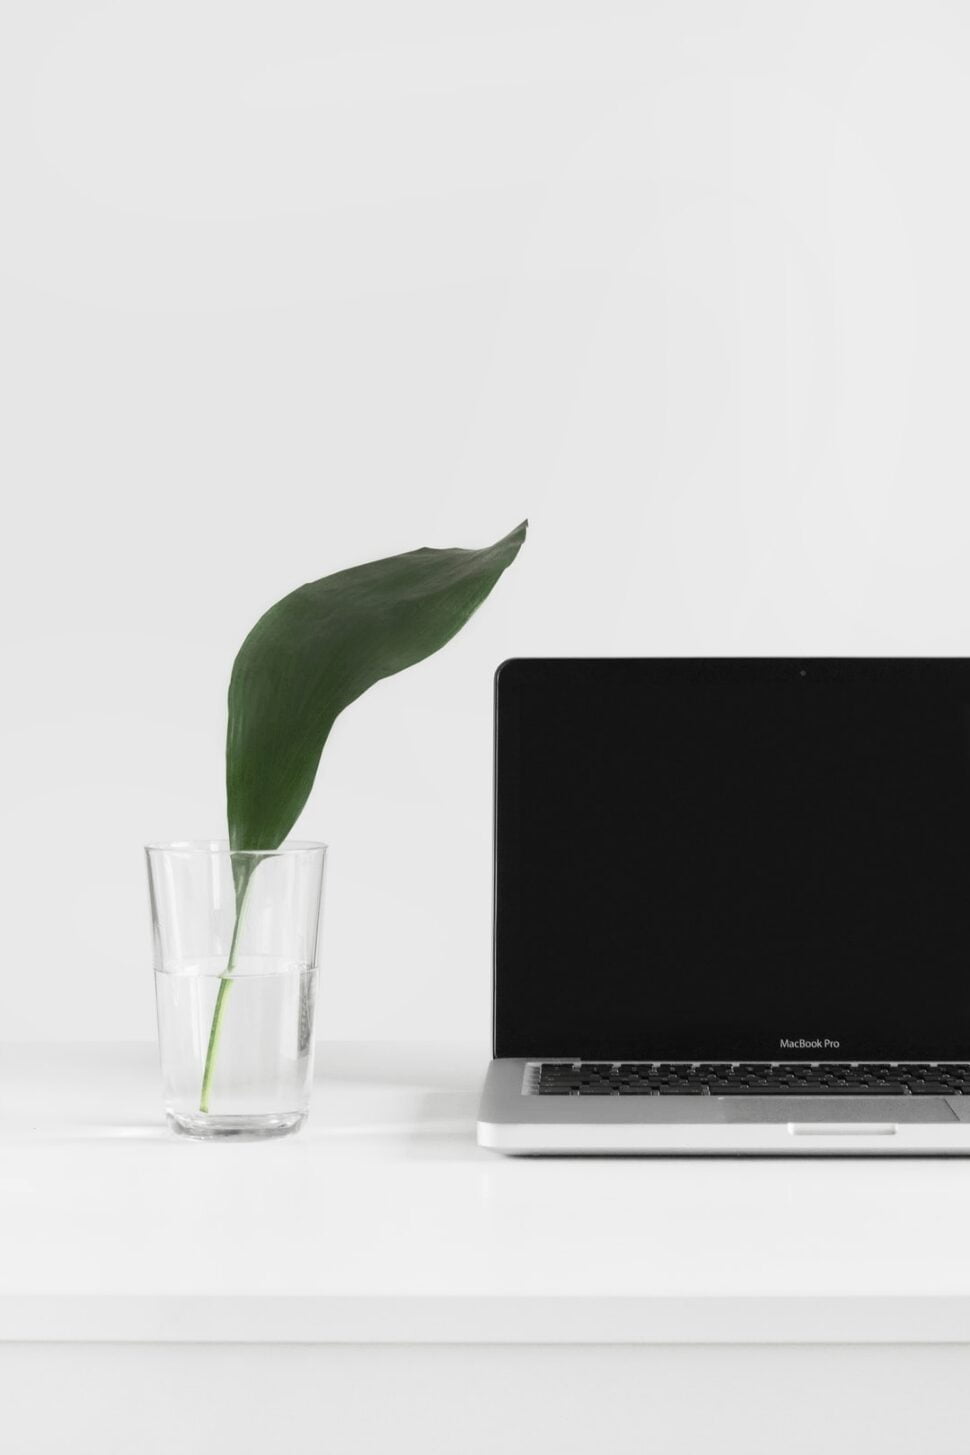 A MacBook Pro beside small plant in glass full of water.